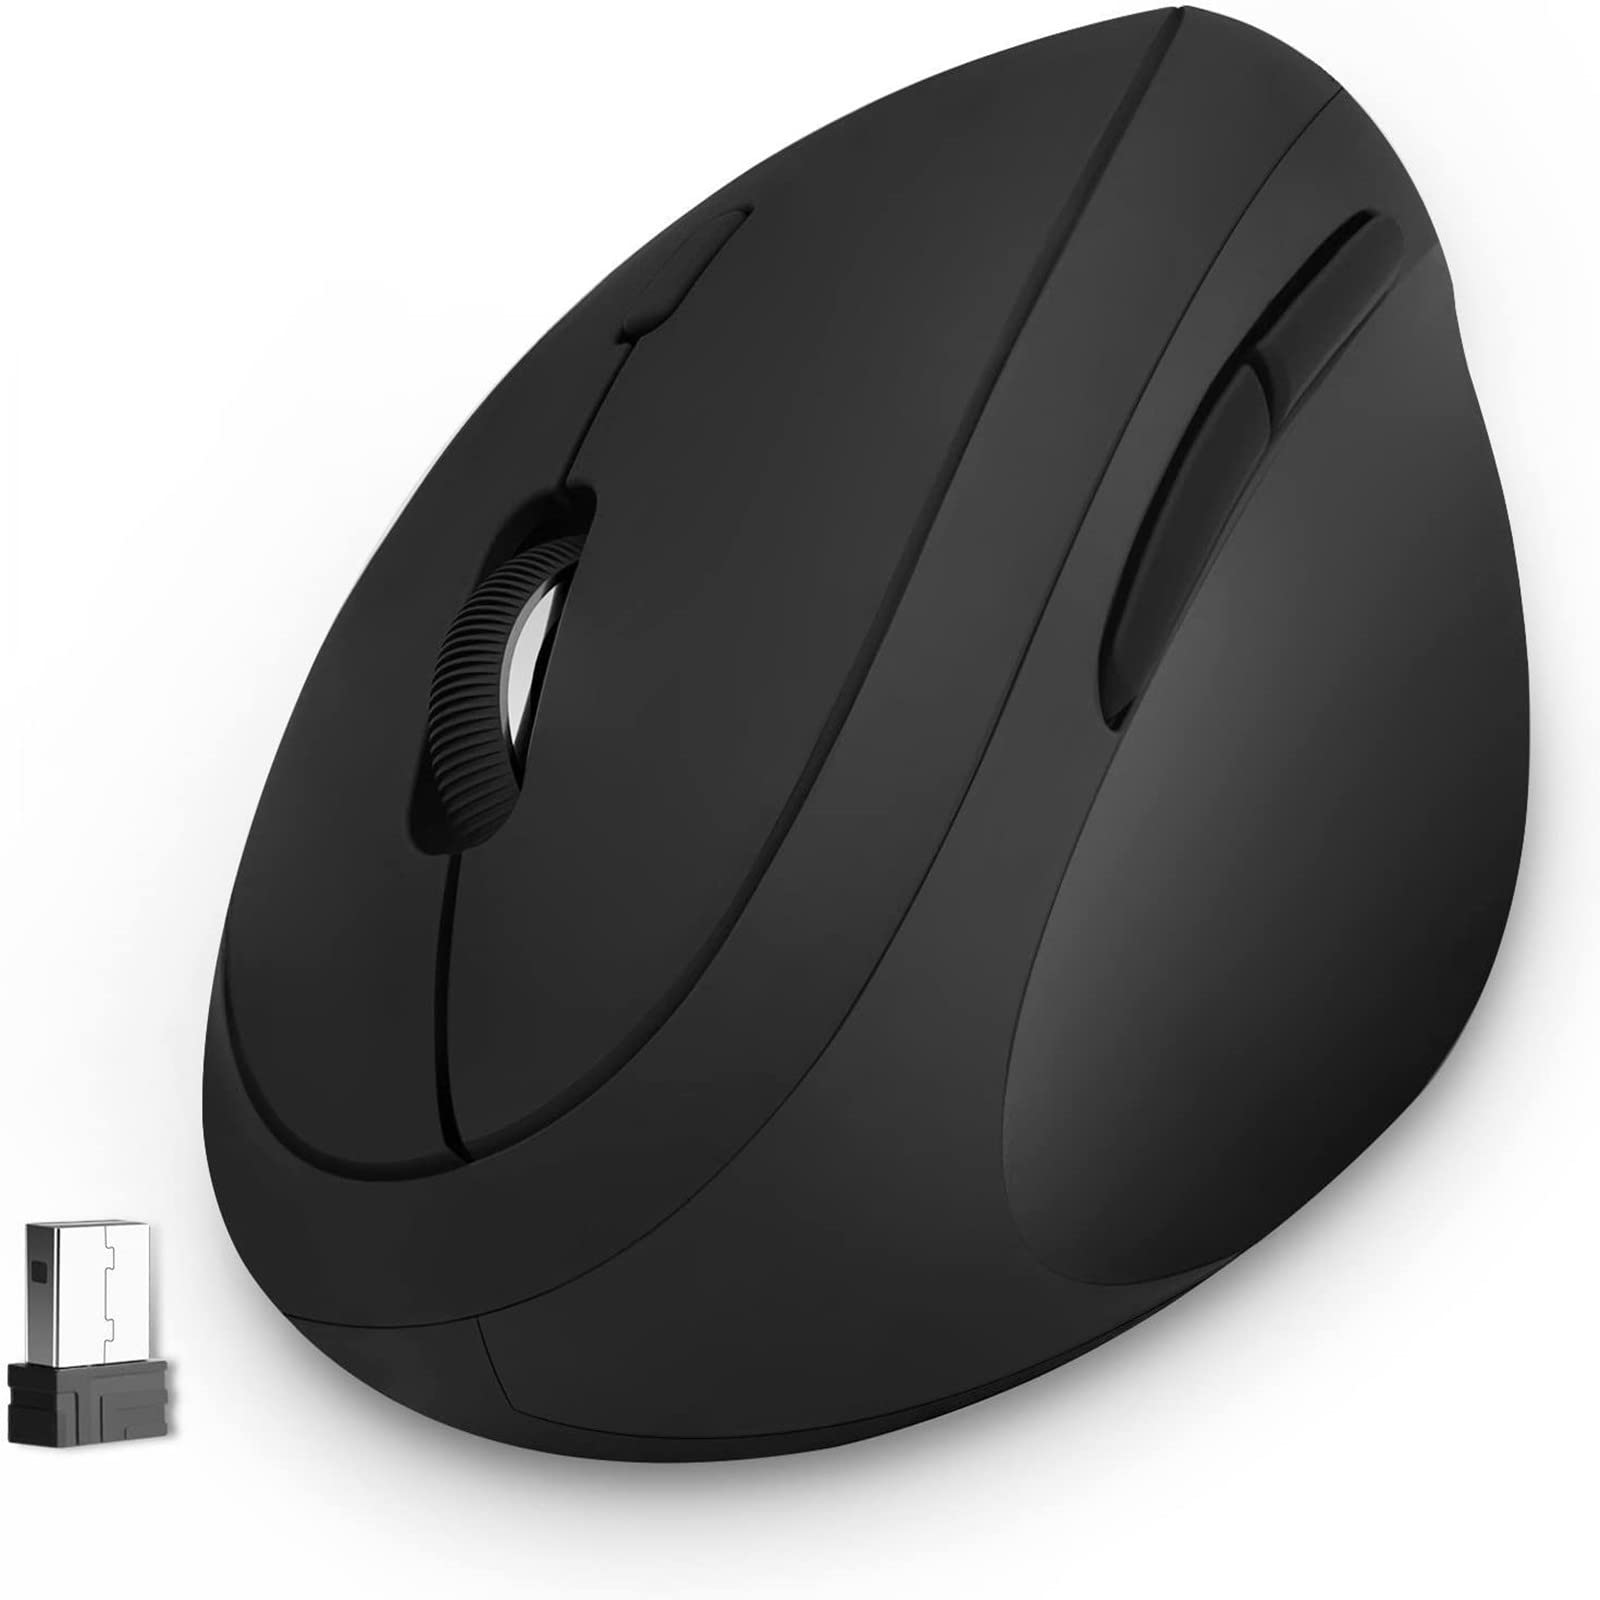 Wireless Ergonomic Mouse, 2.4G Wireless Ergonomic Vertical Mouse against RSI Syndrome with USB Receiver, Silent Mice 800/1200/1600 DPI Adjustable for PC Laptop Computer Desktop, Black